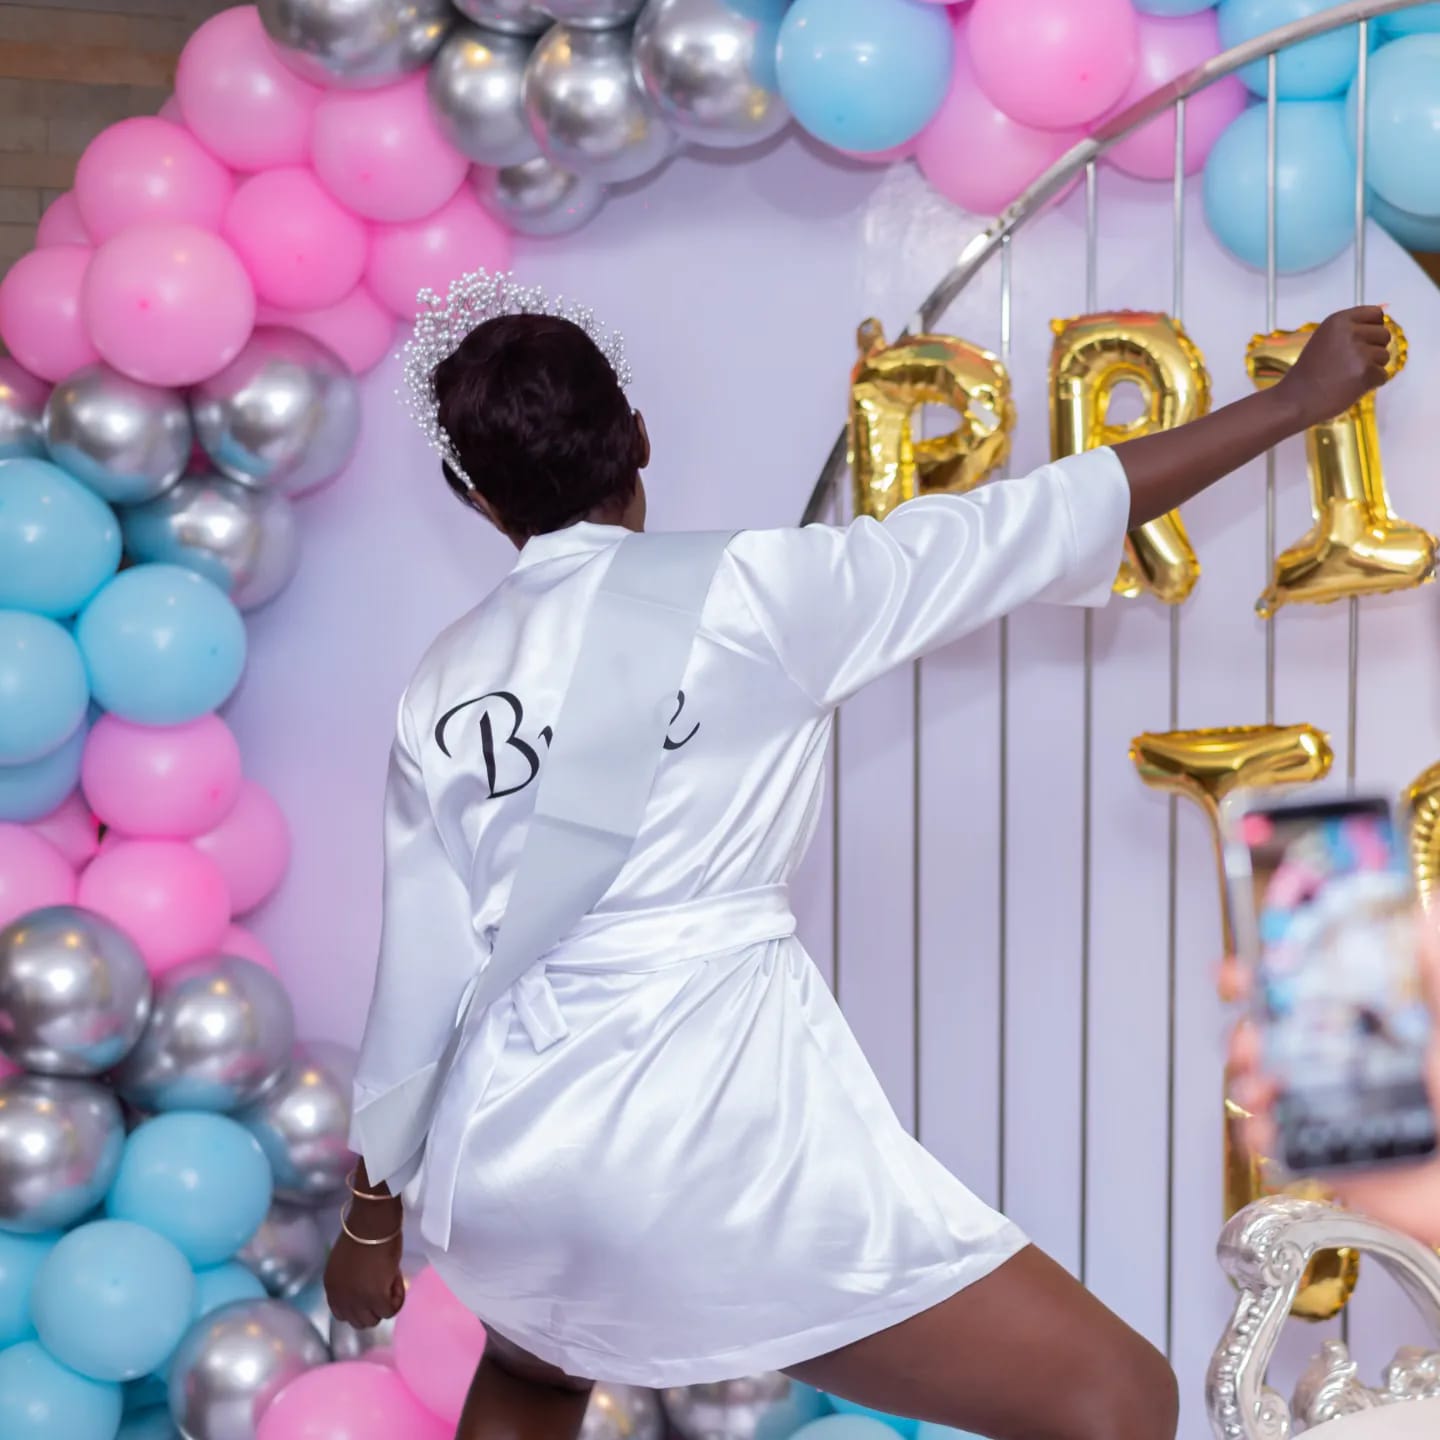 Akothee dancing at her birthday